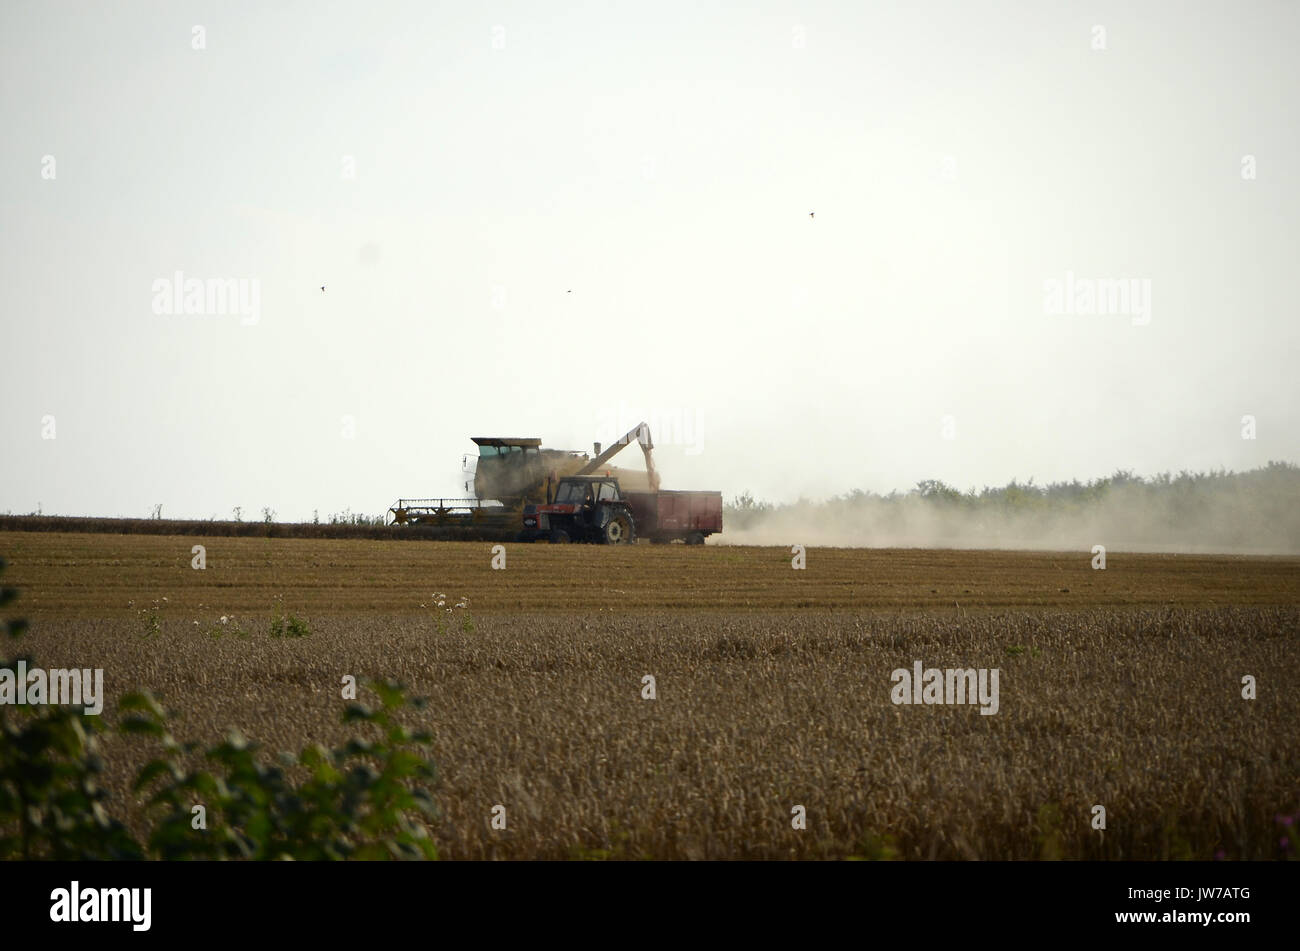 Klinting, Denmark - August 7, 2017: Harvest work with combine harvester in a wheat field. Stock Photo